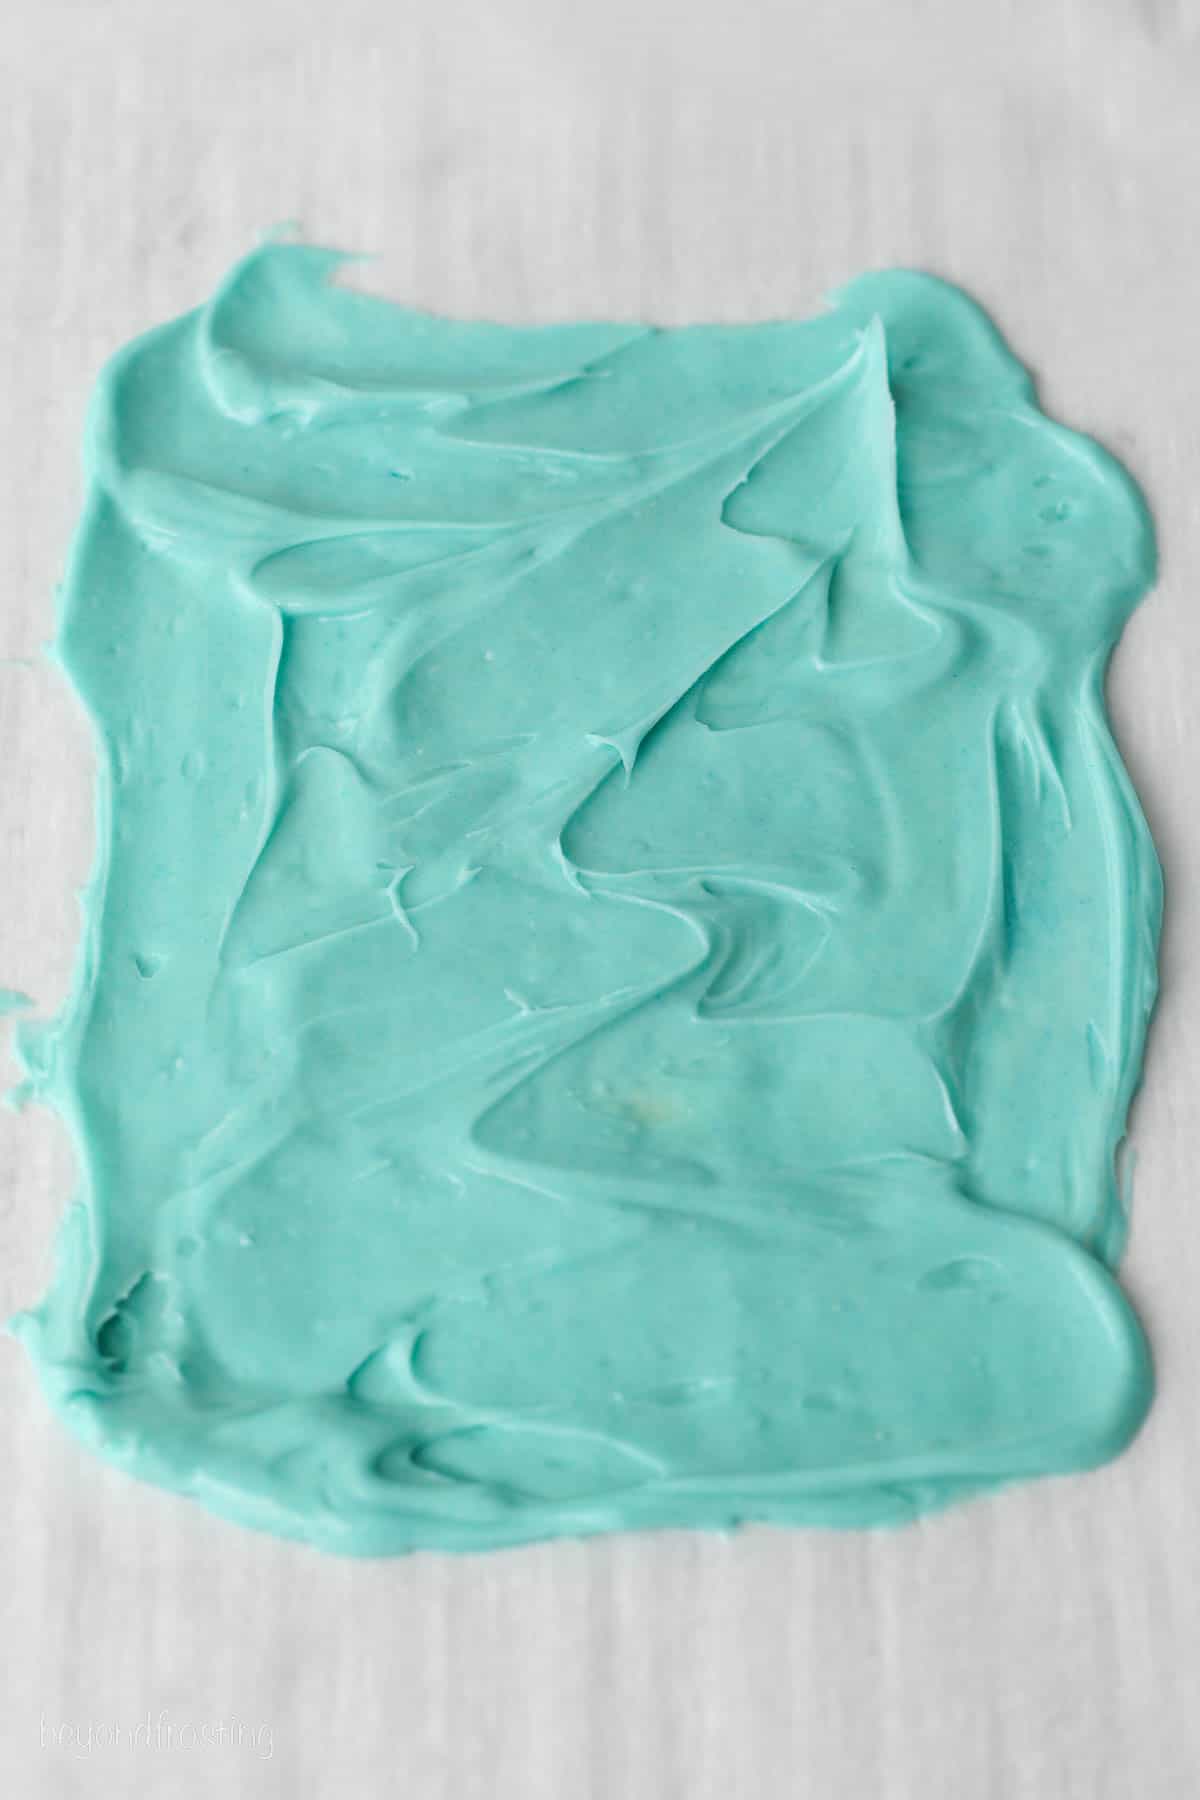 Blue melted chocolate spread in a thin layer on a piece of parchment paper.